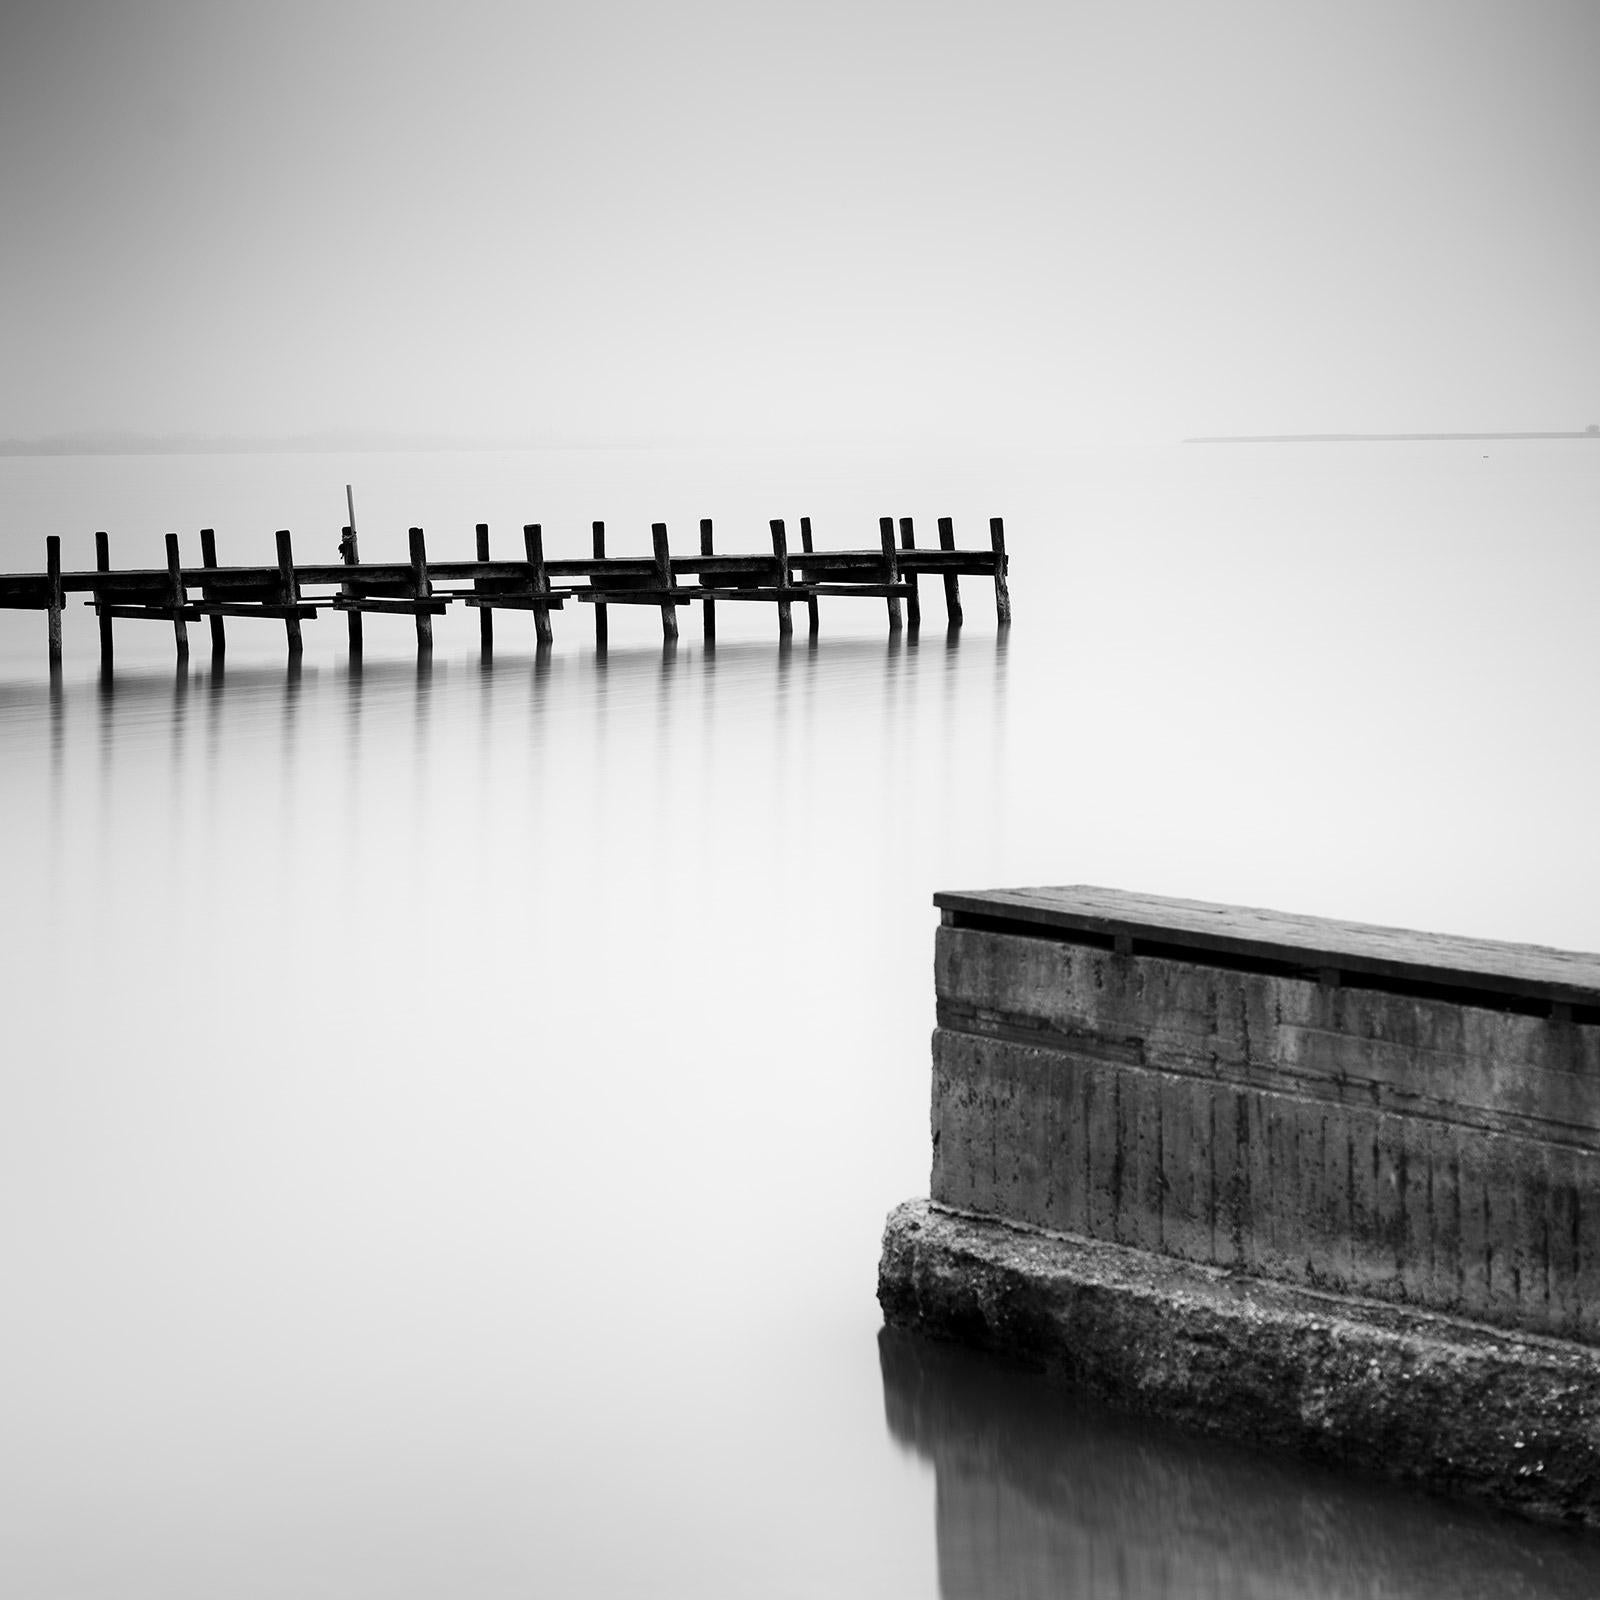 Gerald Berghammer Landscape Photograph - Misty morning on the Lake, Jetty, Pier, black and white photography, landscape